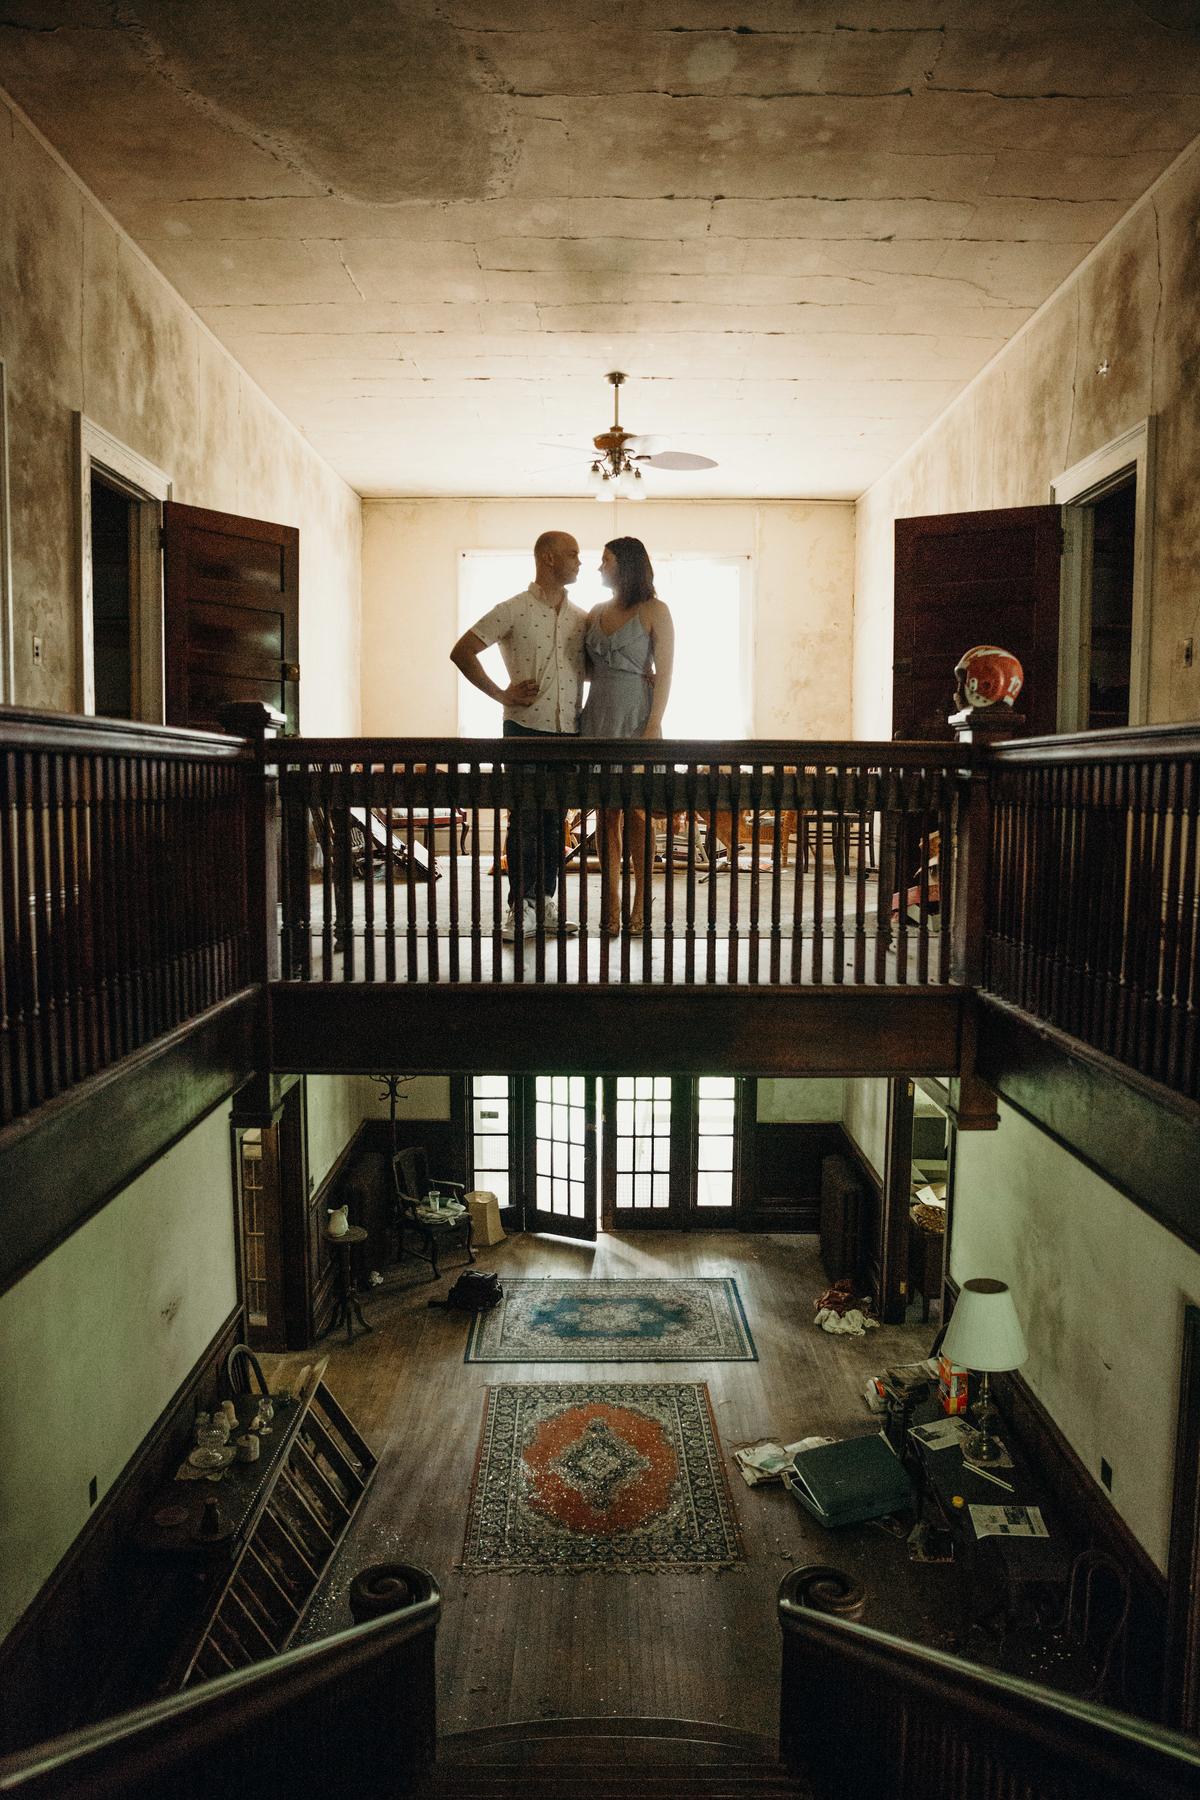 The foyer before being renovated. (Courtesy of <a href="https://www.instagram.com/704photography/">704 Photography</a> via <a href="https://www.instagram.com/turningthepagemansion/">Trey and Abby</a>)